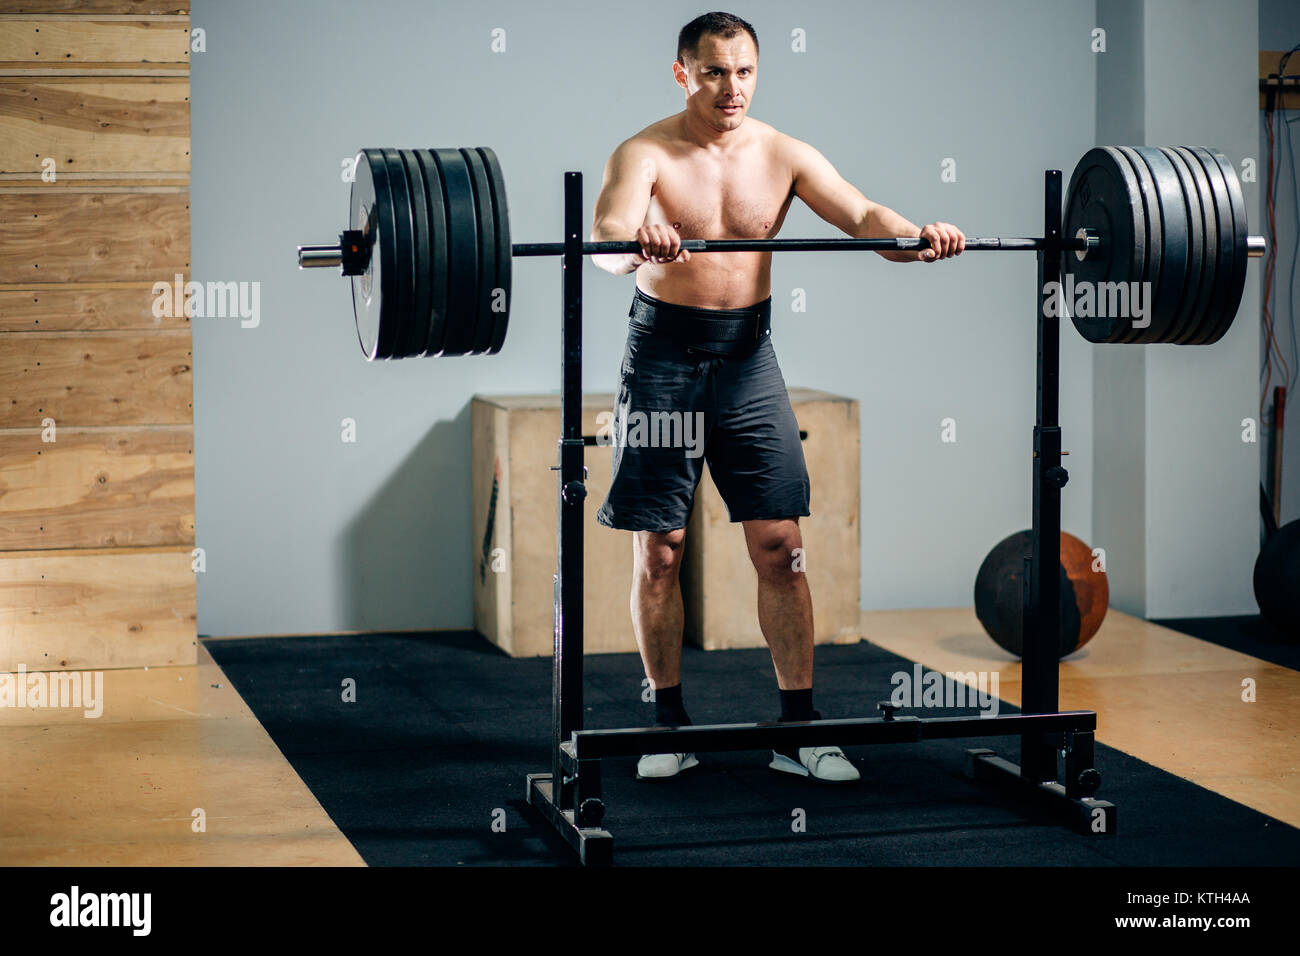 Man standing by a barbell safety stand in a gym Stock Photo